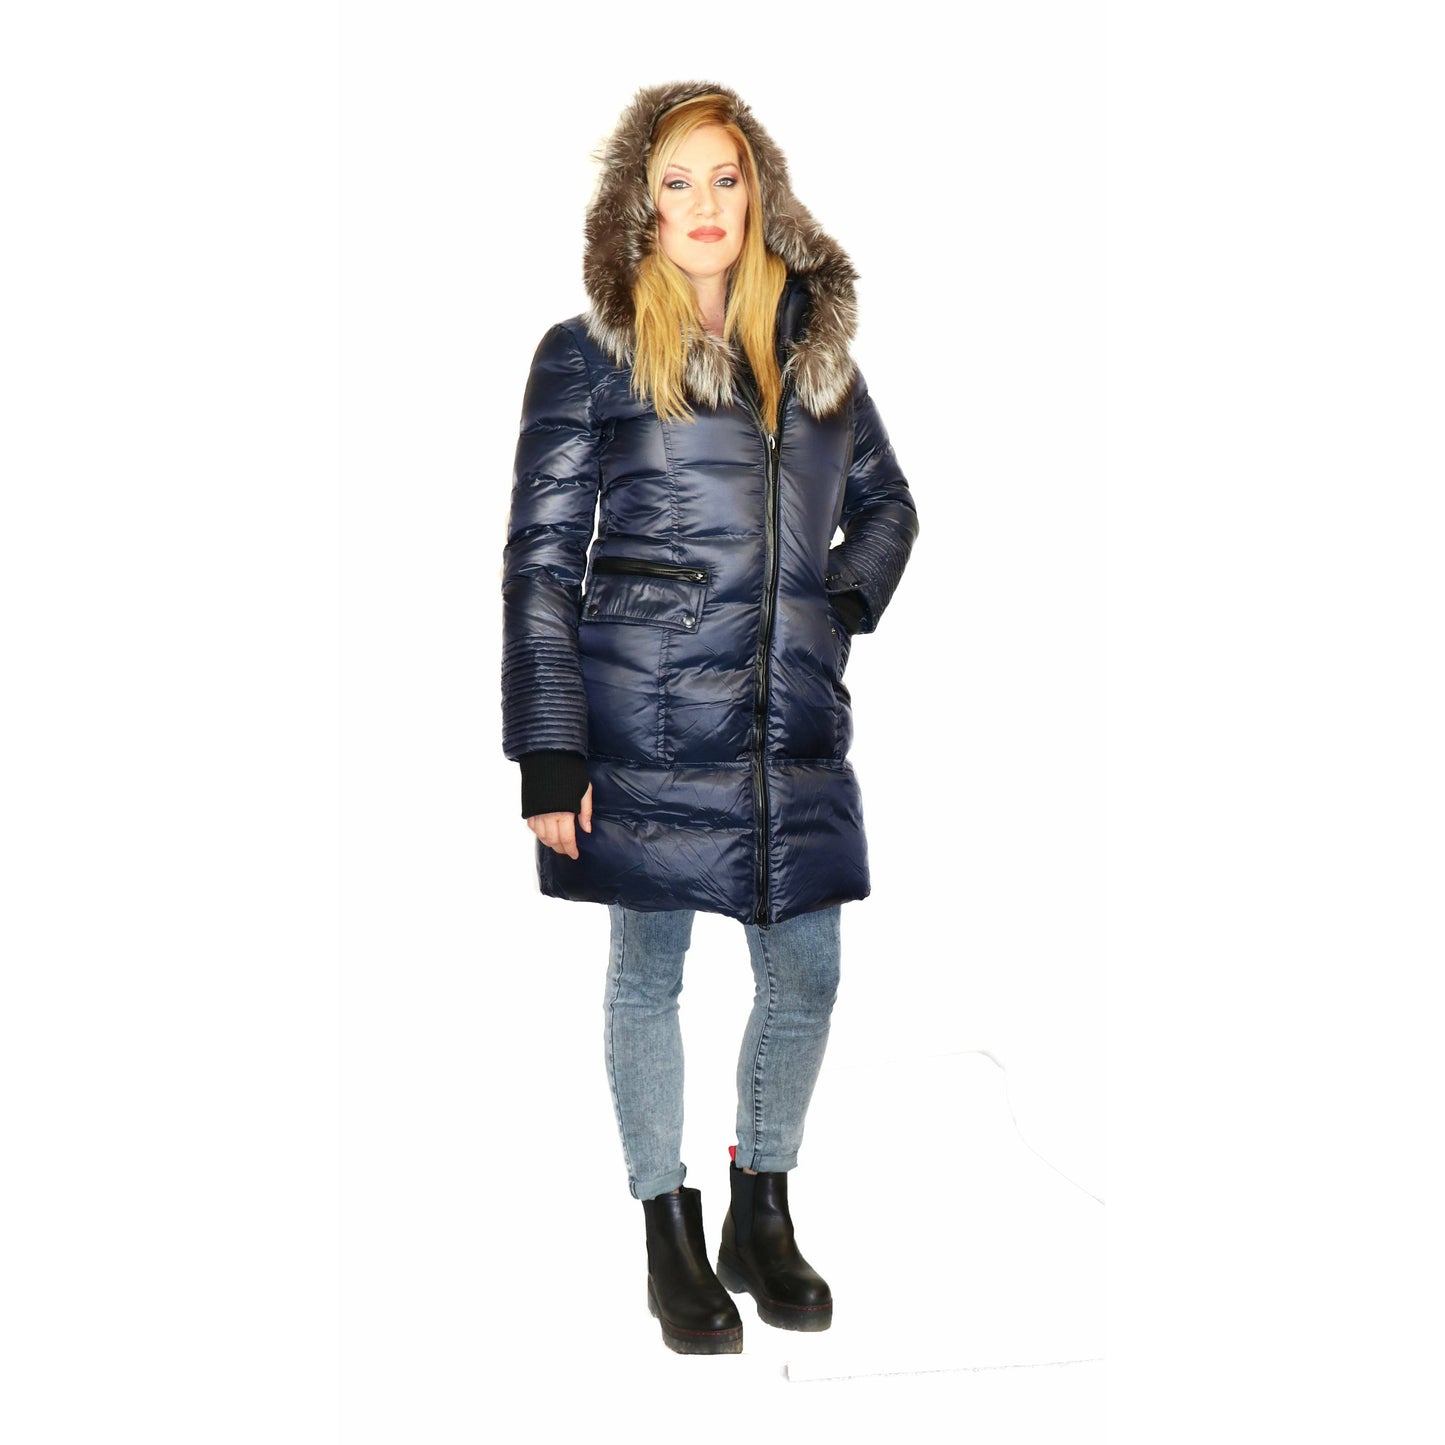 Towmy Women's Down Coat with Silver Fox Fur Hood - Zooloo Leather